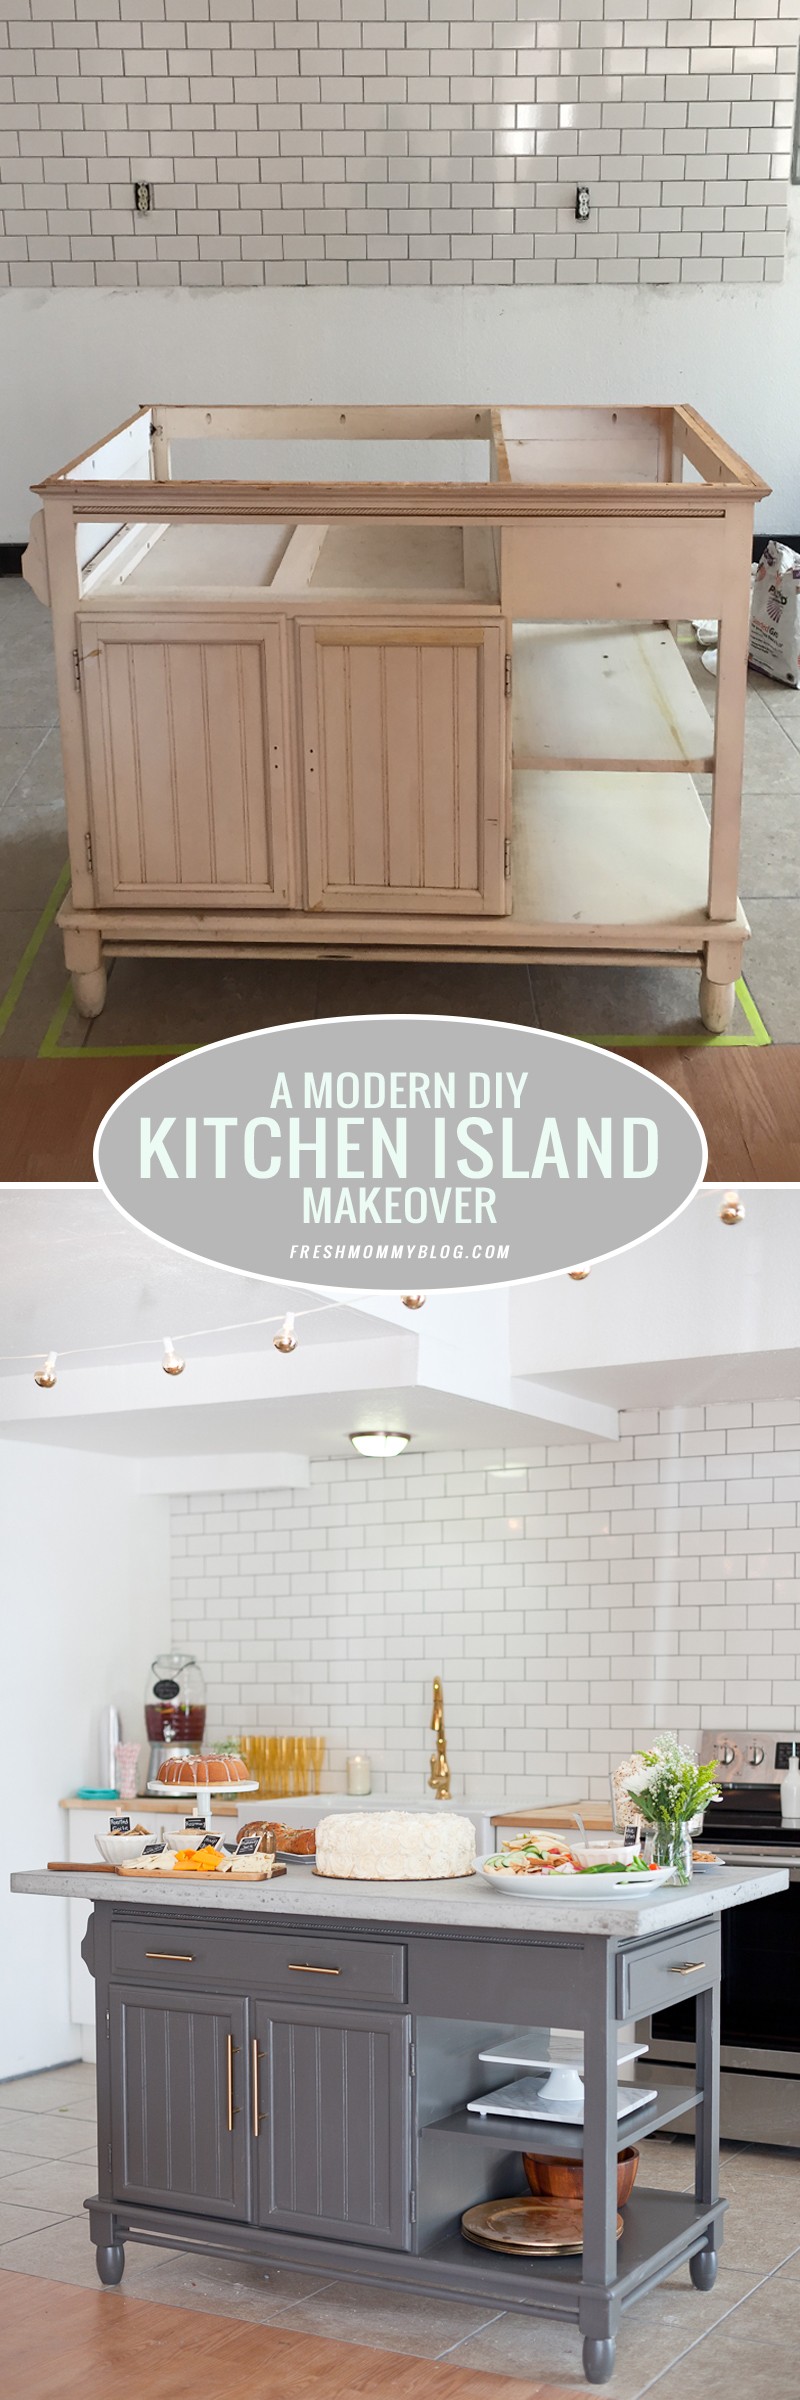 A Modern DIY Kitchen Island Makeover Before and After